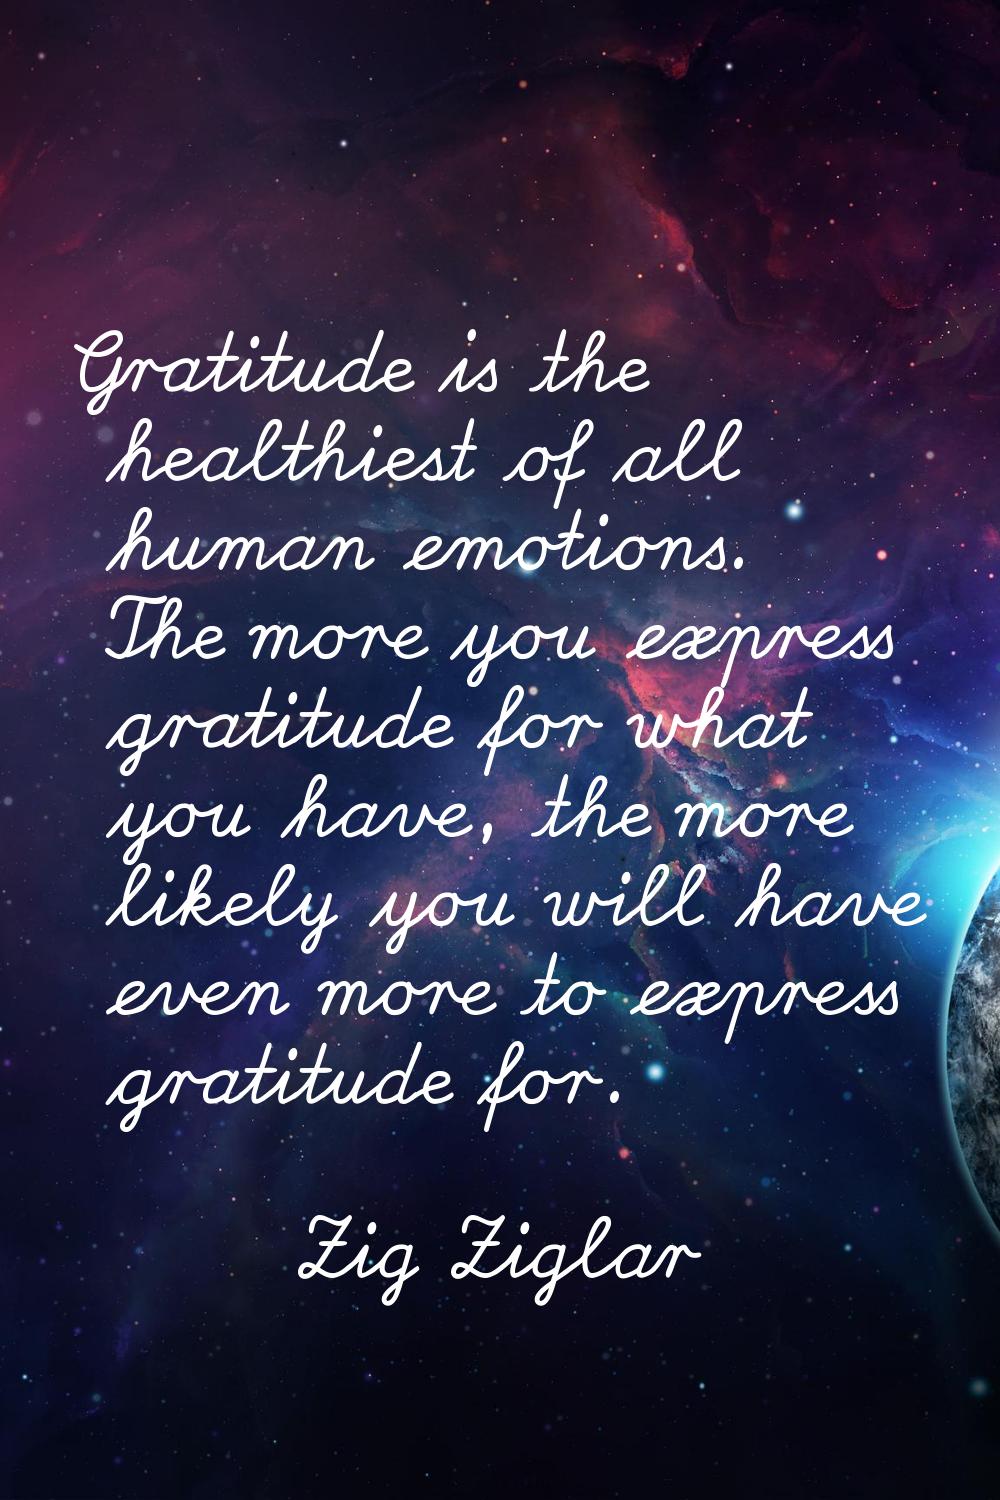 Gratitude is the healthiest of all human emotions. The more you express gratitude for what you have